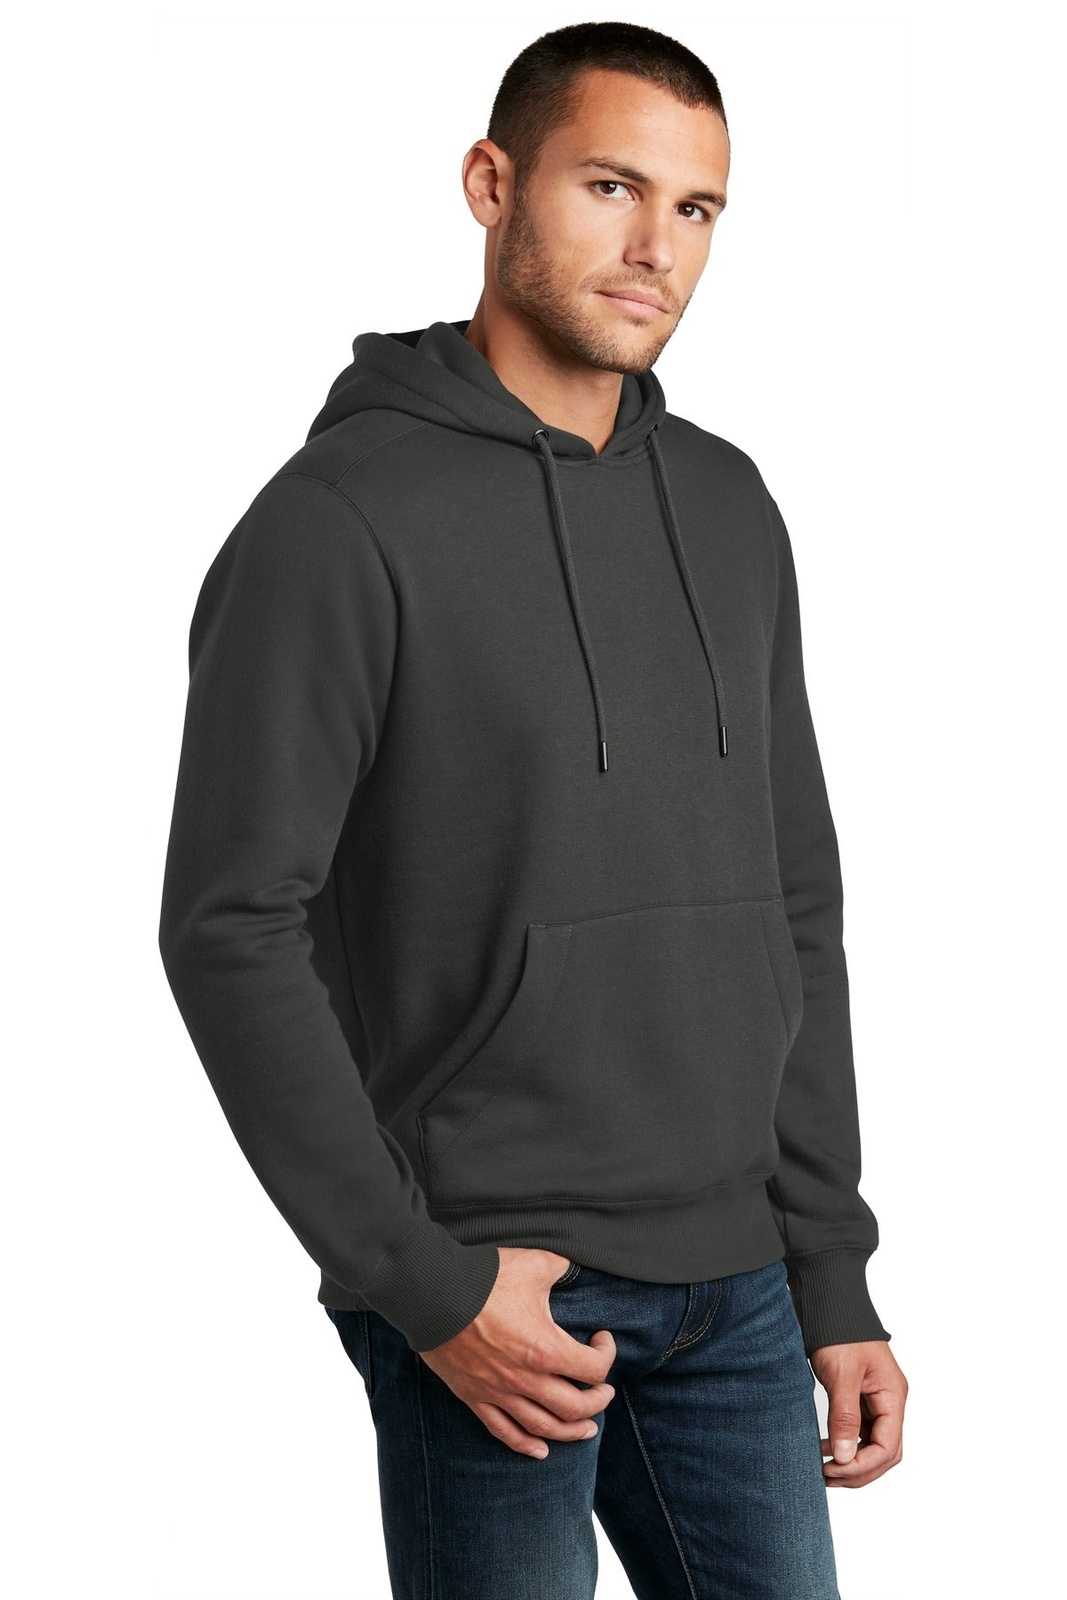 District DT1101 Perfect Weight Fleece Hoodie - Charcoal - HIT a Double - 4